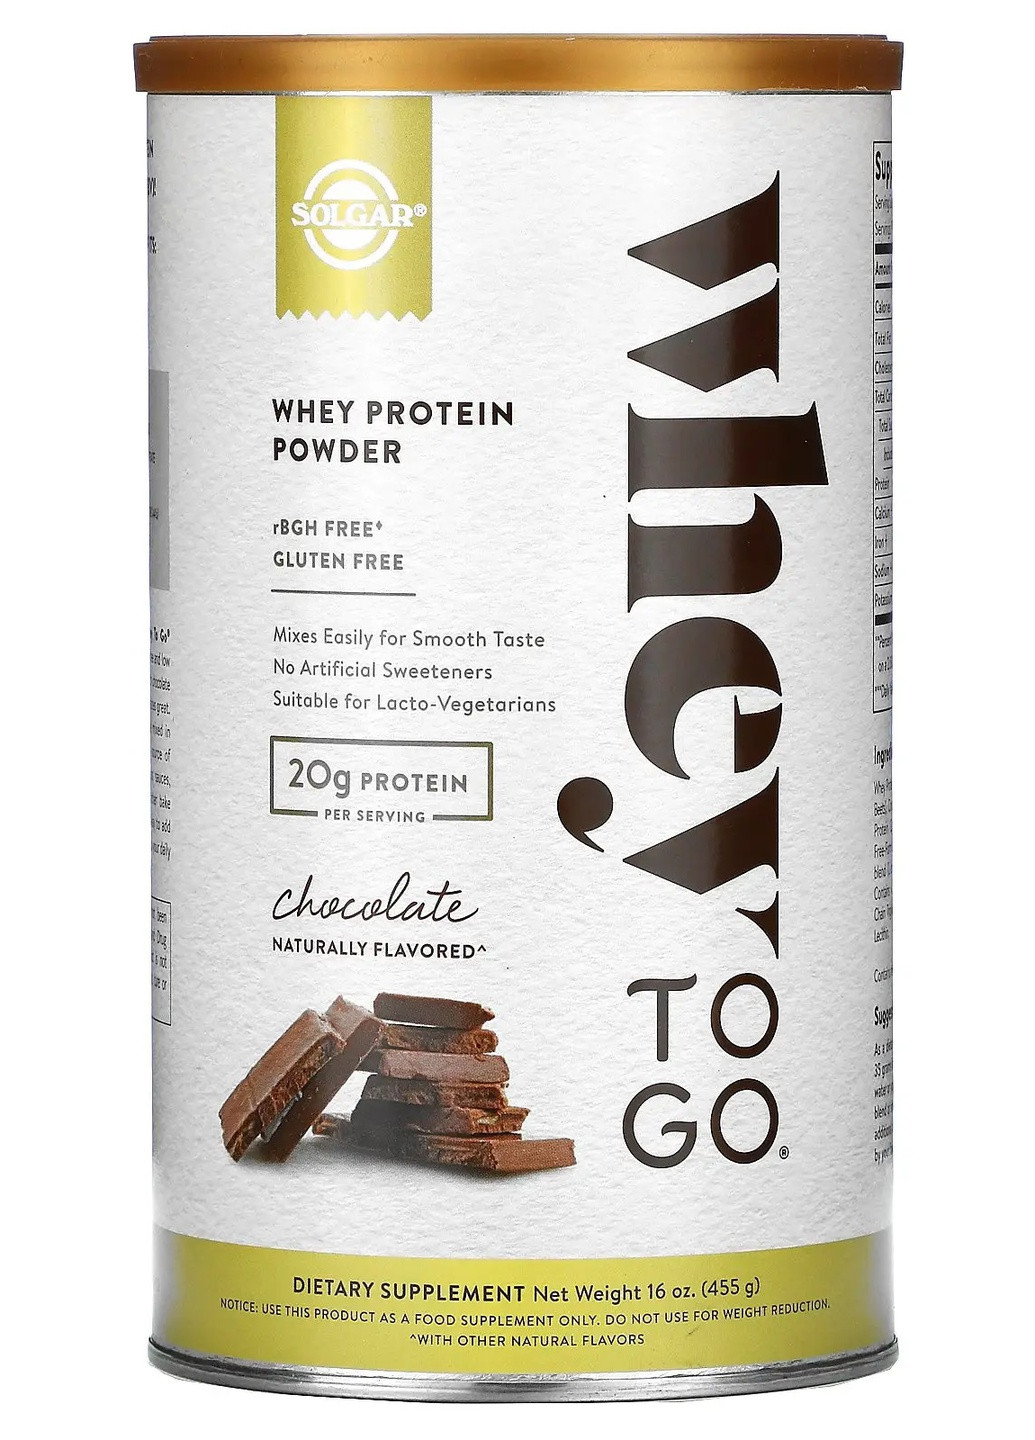 Whey To Go Whey Protein Powder 16 oz 453,5 g /13 servings/ Natural Chocolate Flavor Solgar (256719118)